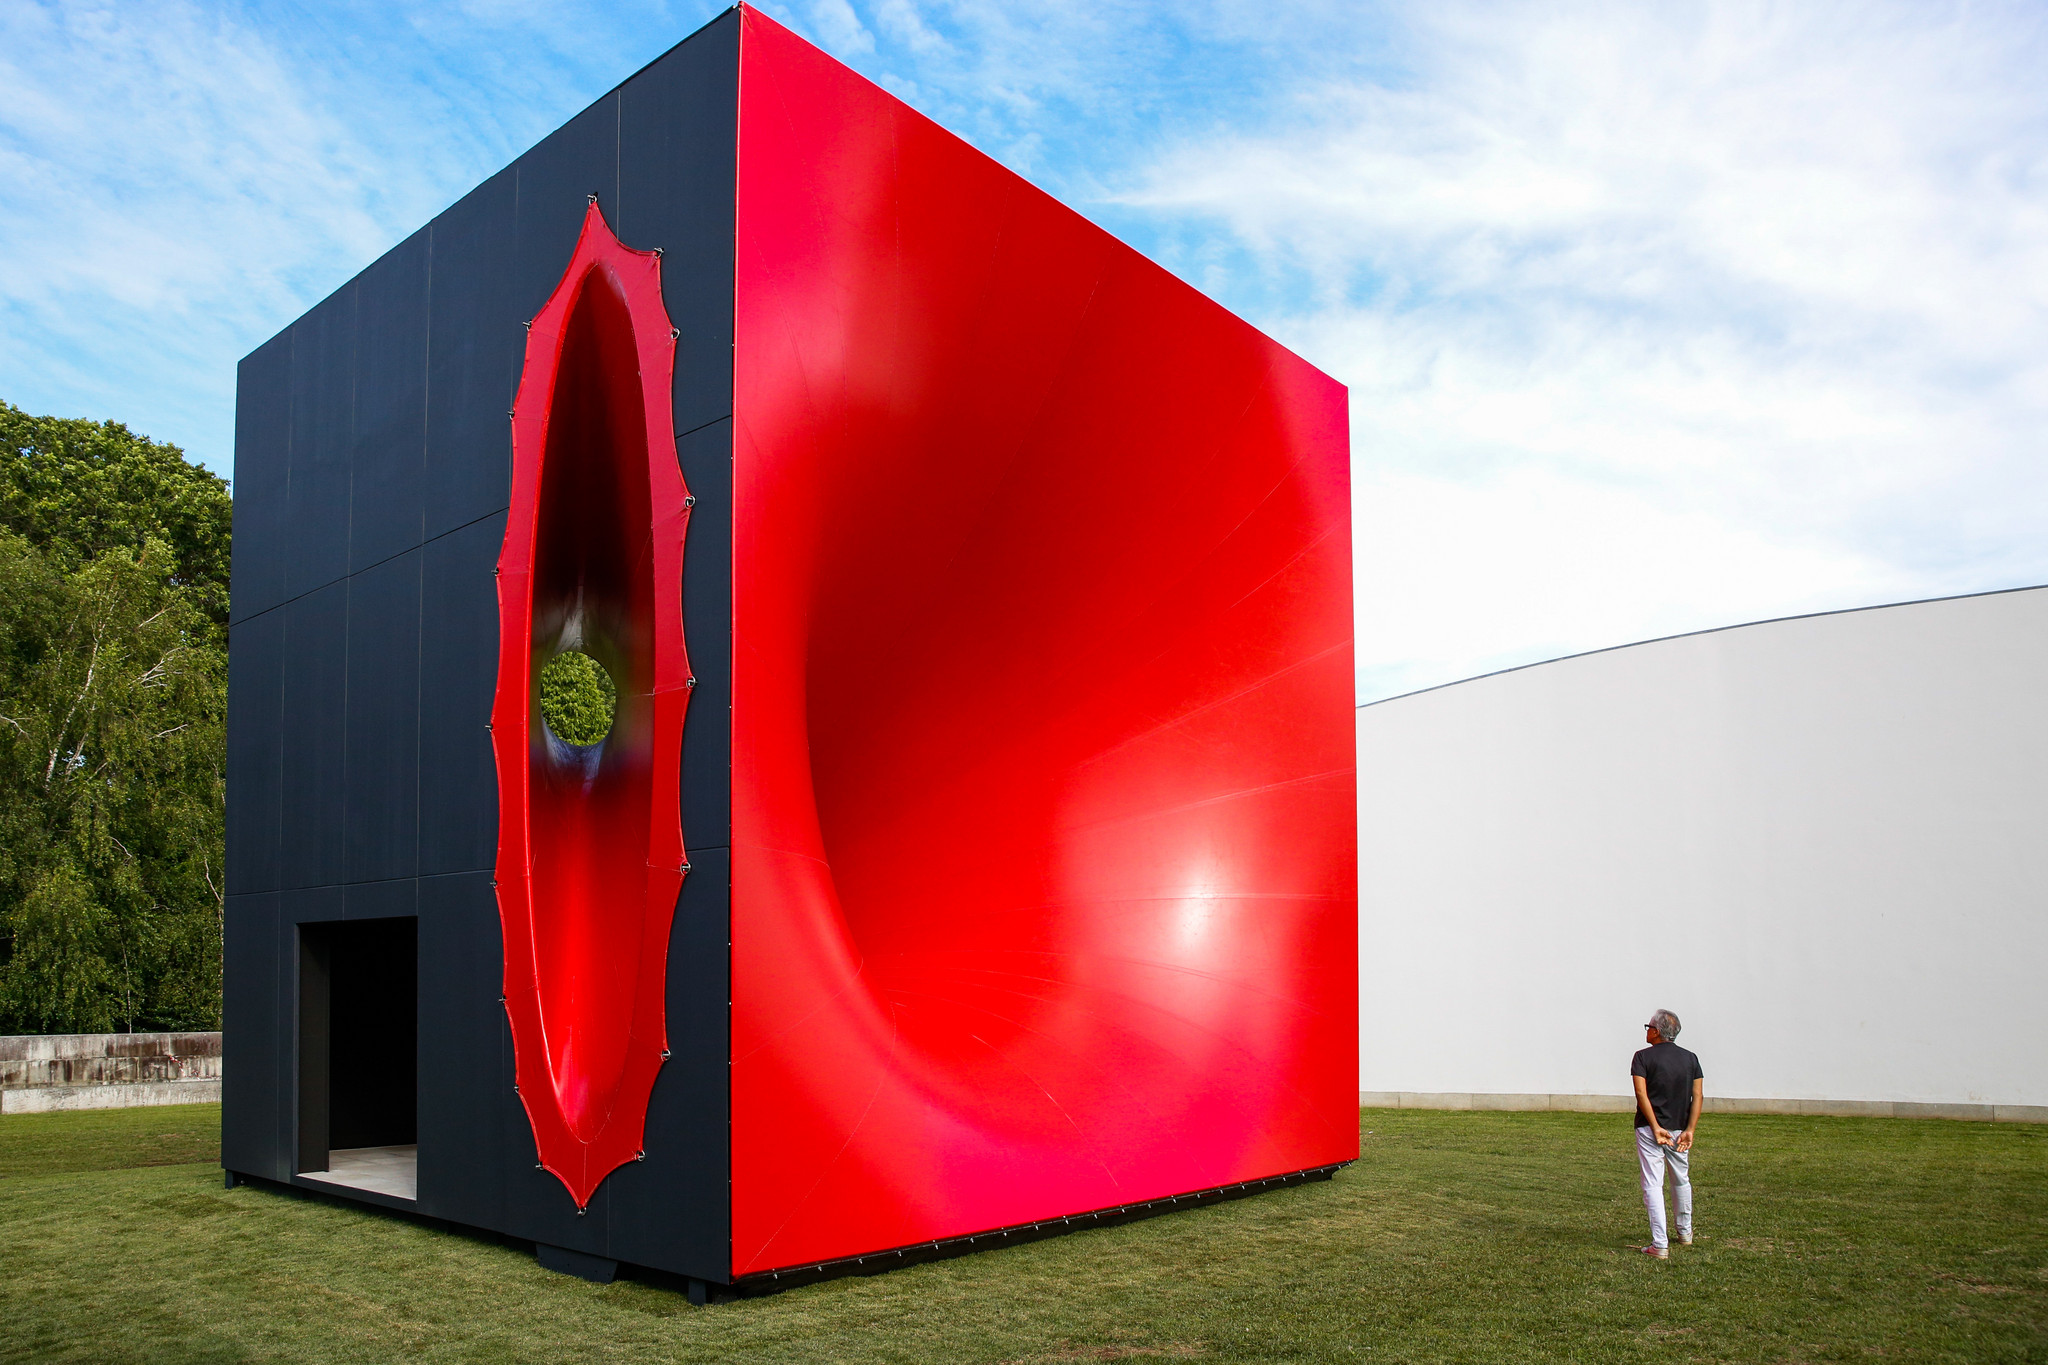 LM- Suzanne Cotter e obras Anish Kapoor 04-07-18-1-8.JPG